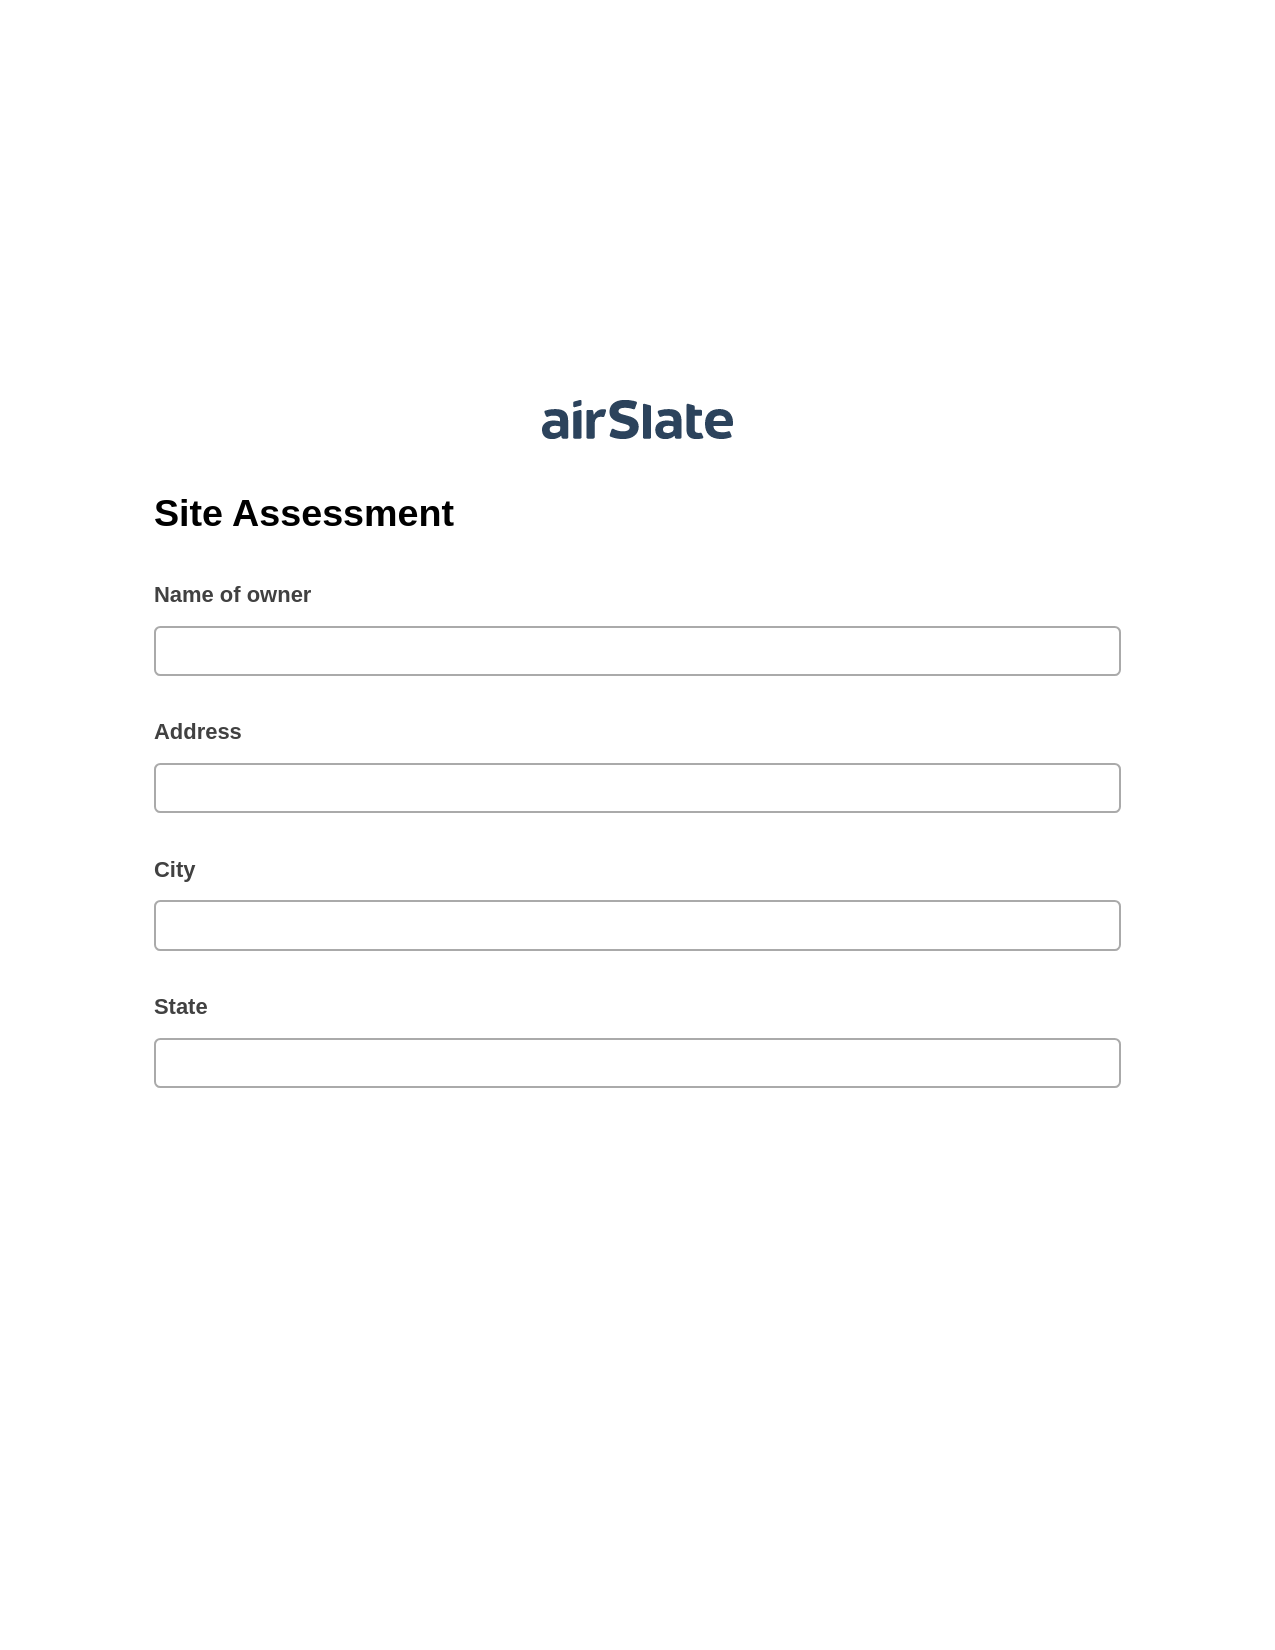 Site Assessment Pre-fill Dropdowns from Smartsheet Bot, Lock the slate bot, Export to Smartsheet